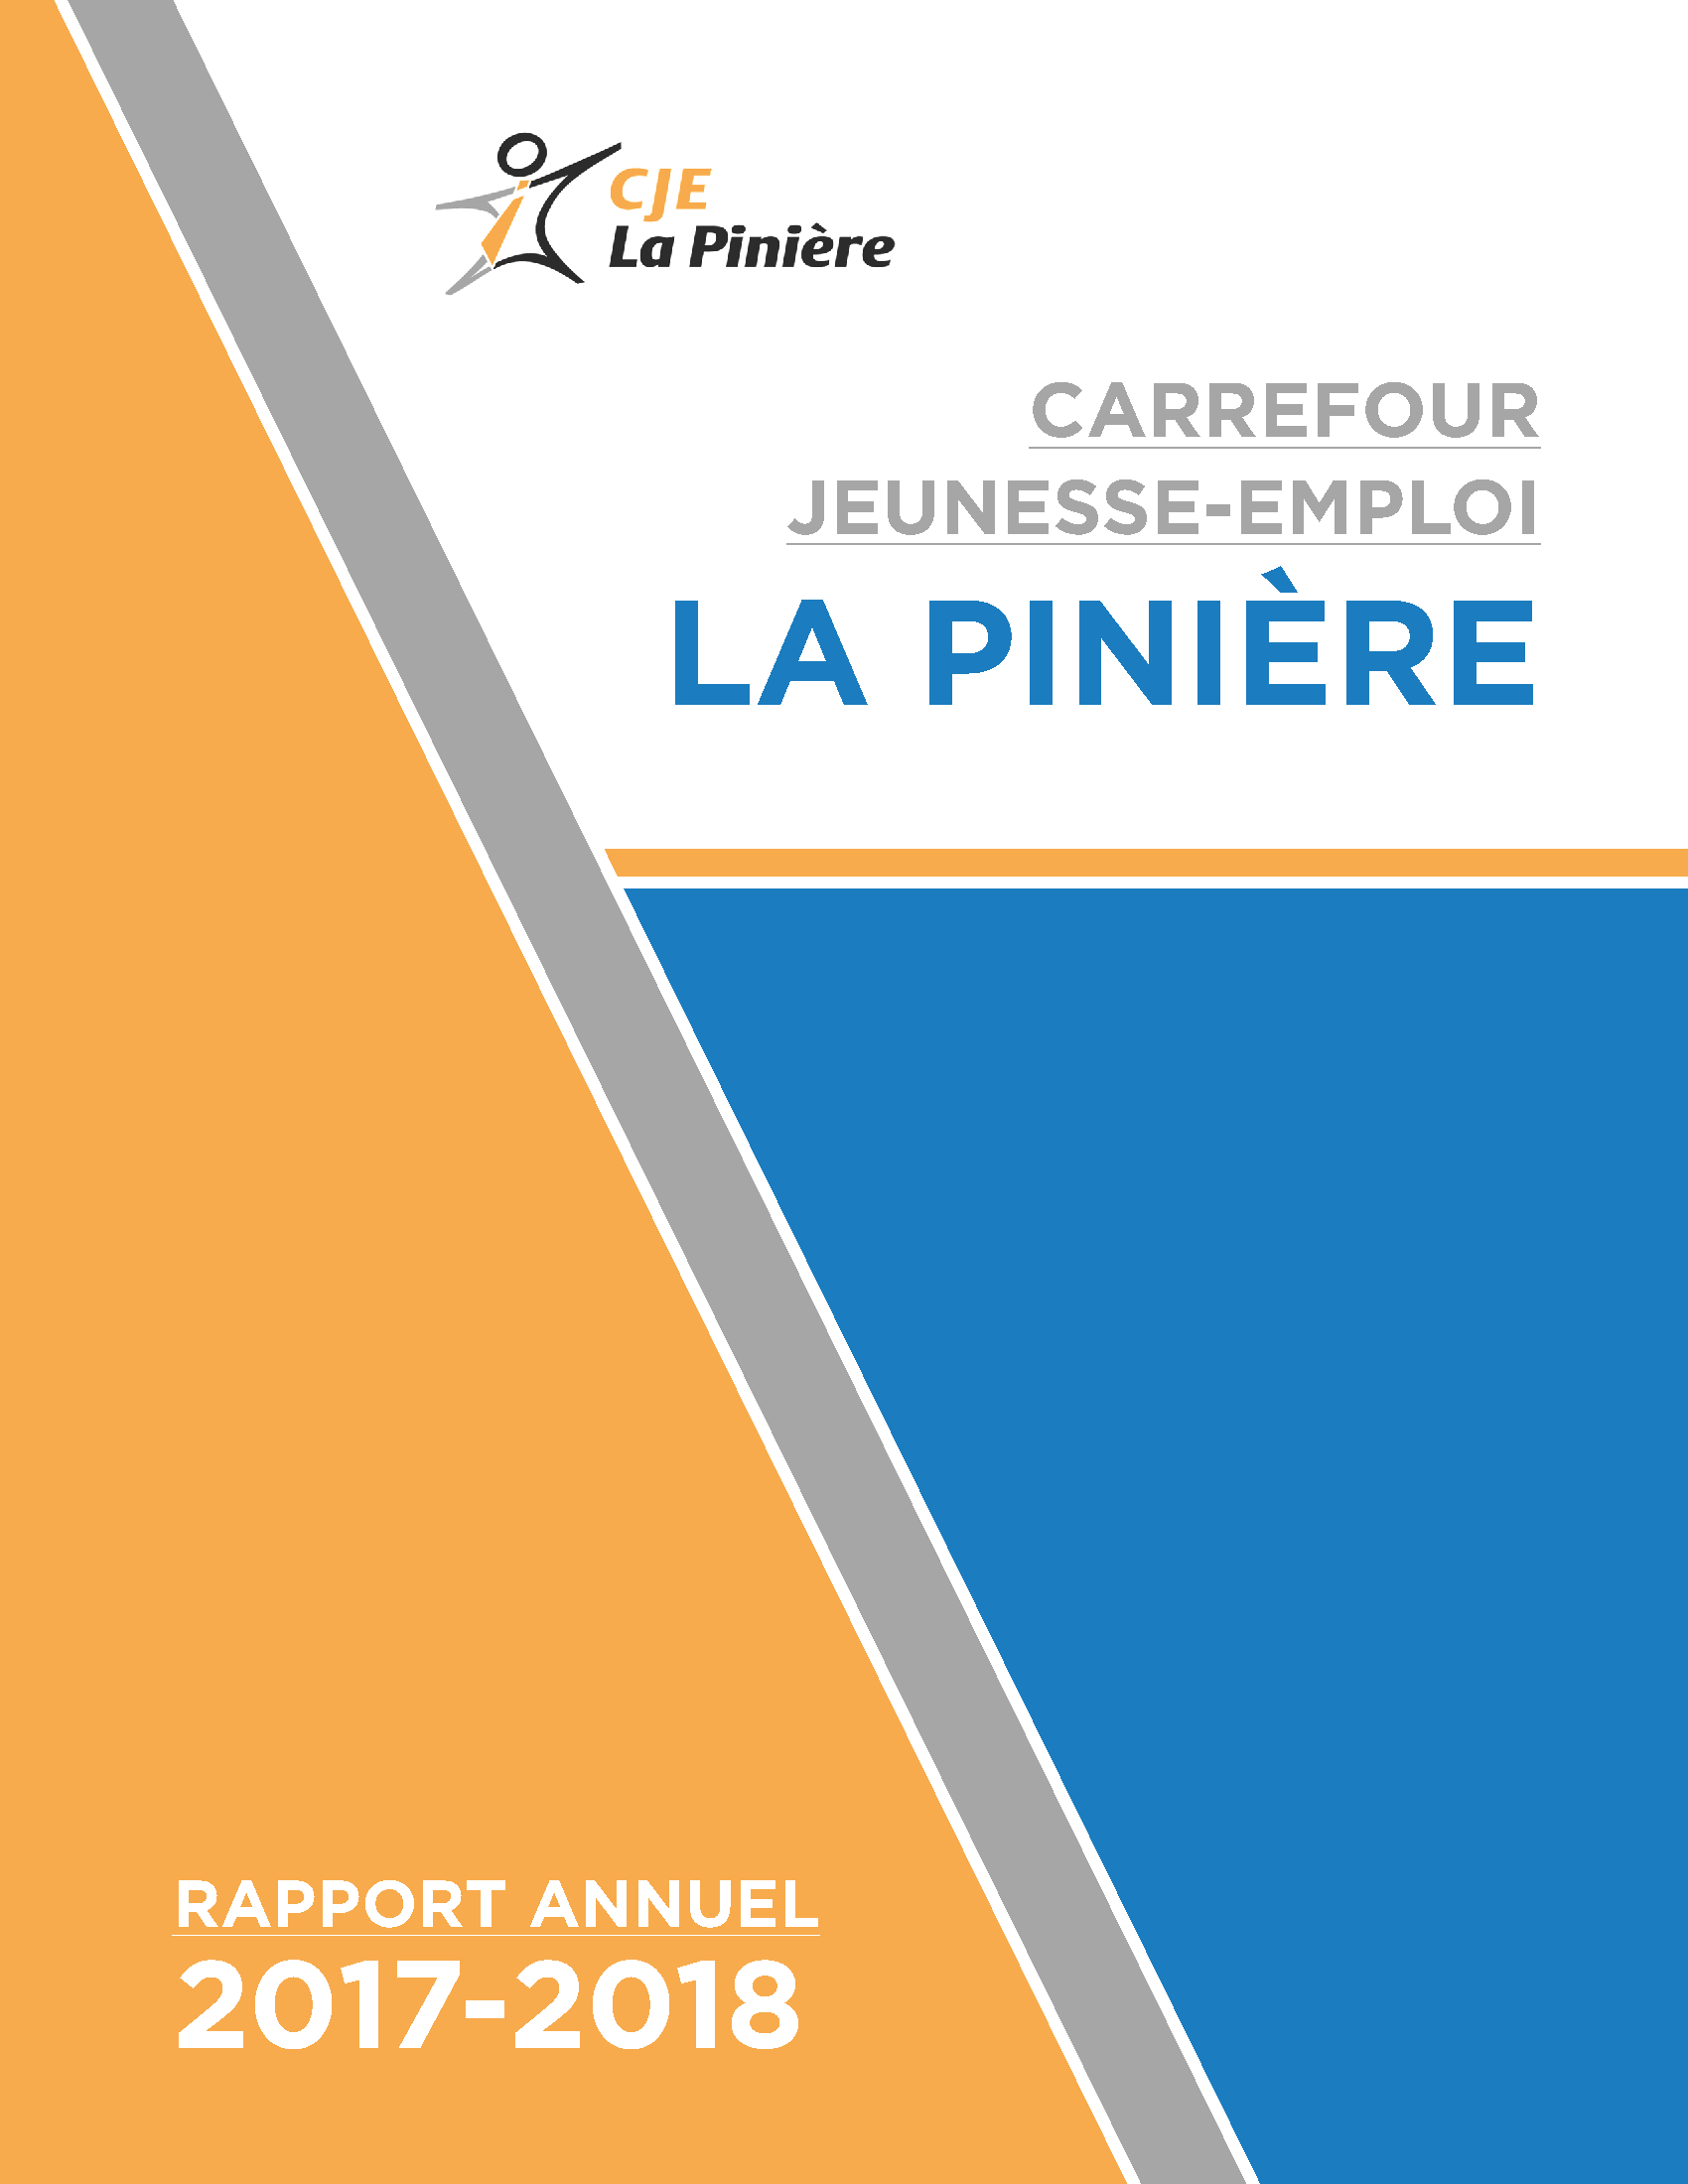 Print CJE%20Lapiniere-Rapport%20Annuel-2018-Page-01-%28clementlemaychaput.com%29